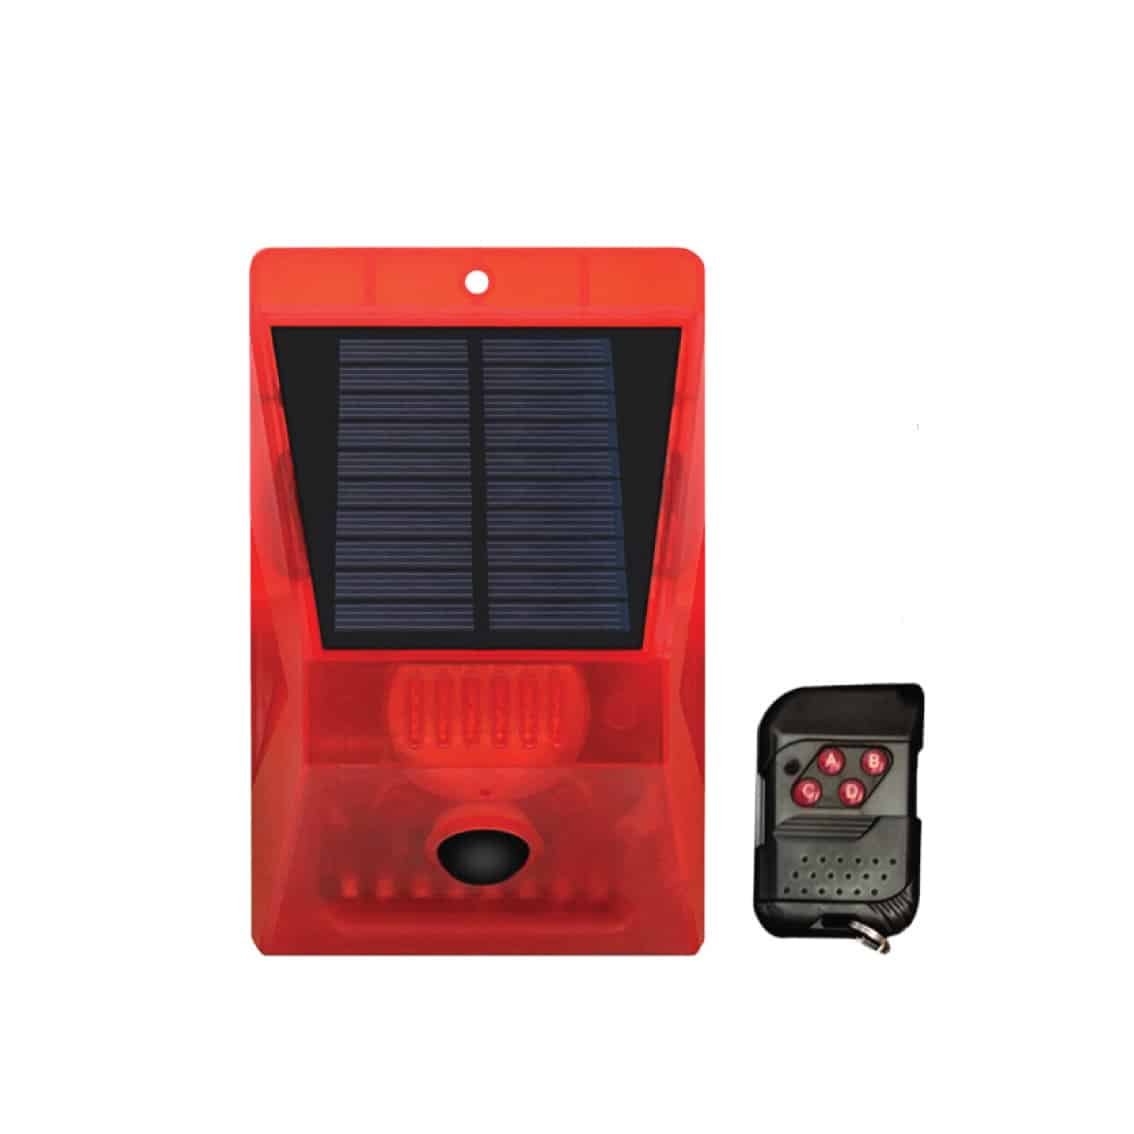 The Solar Motion Detector 5 with remote